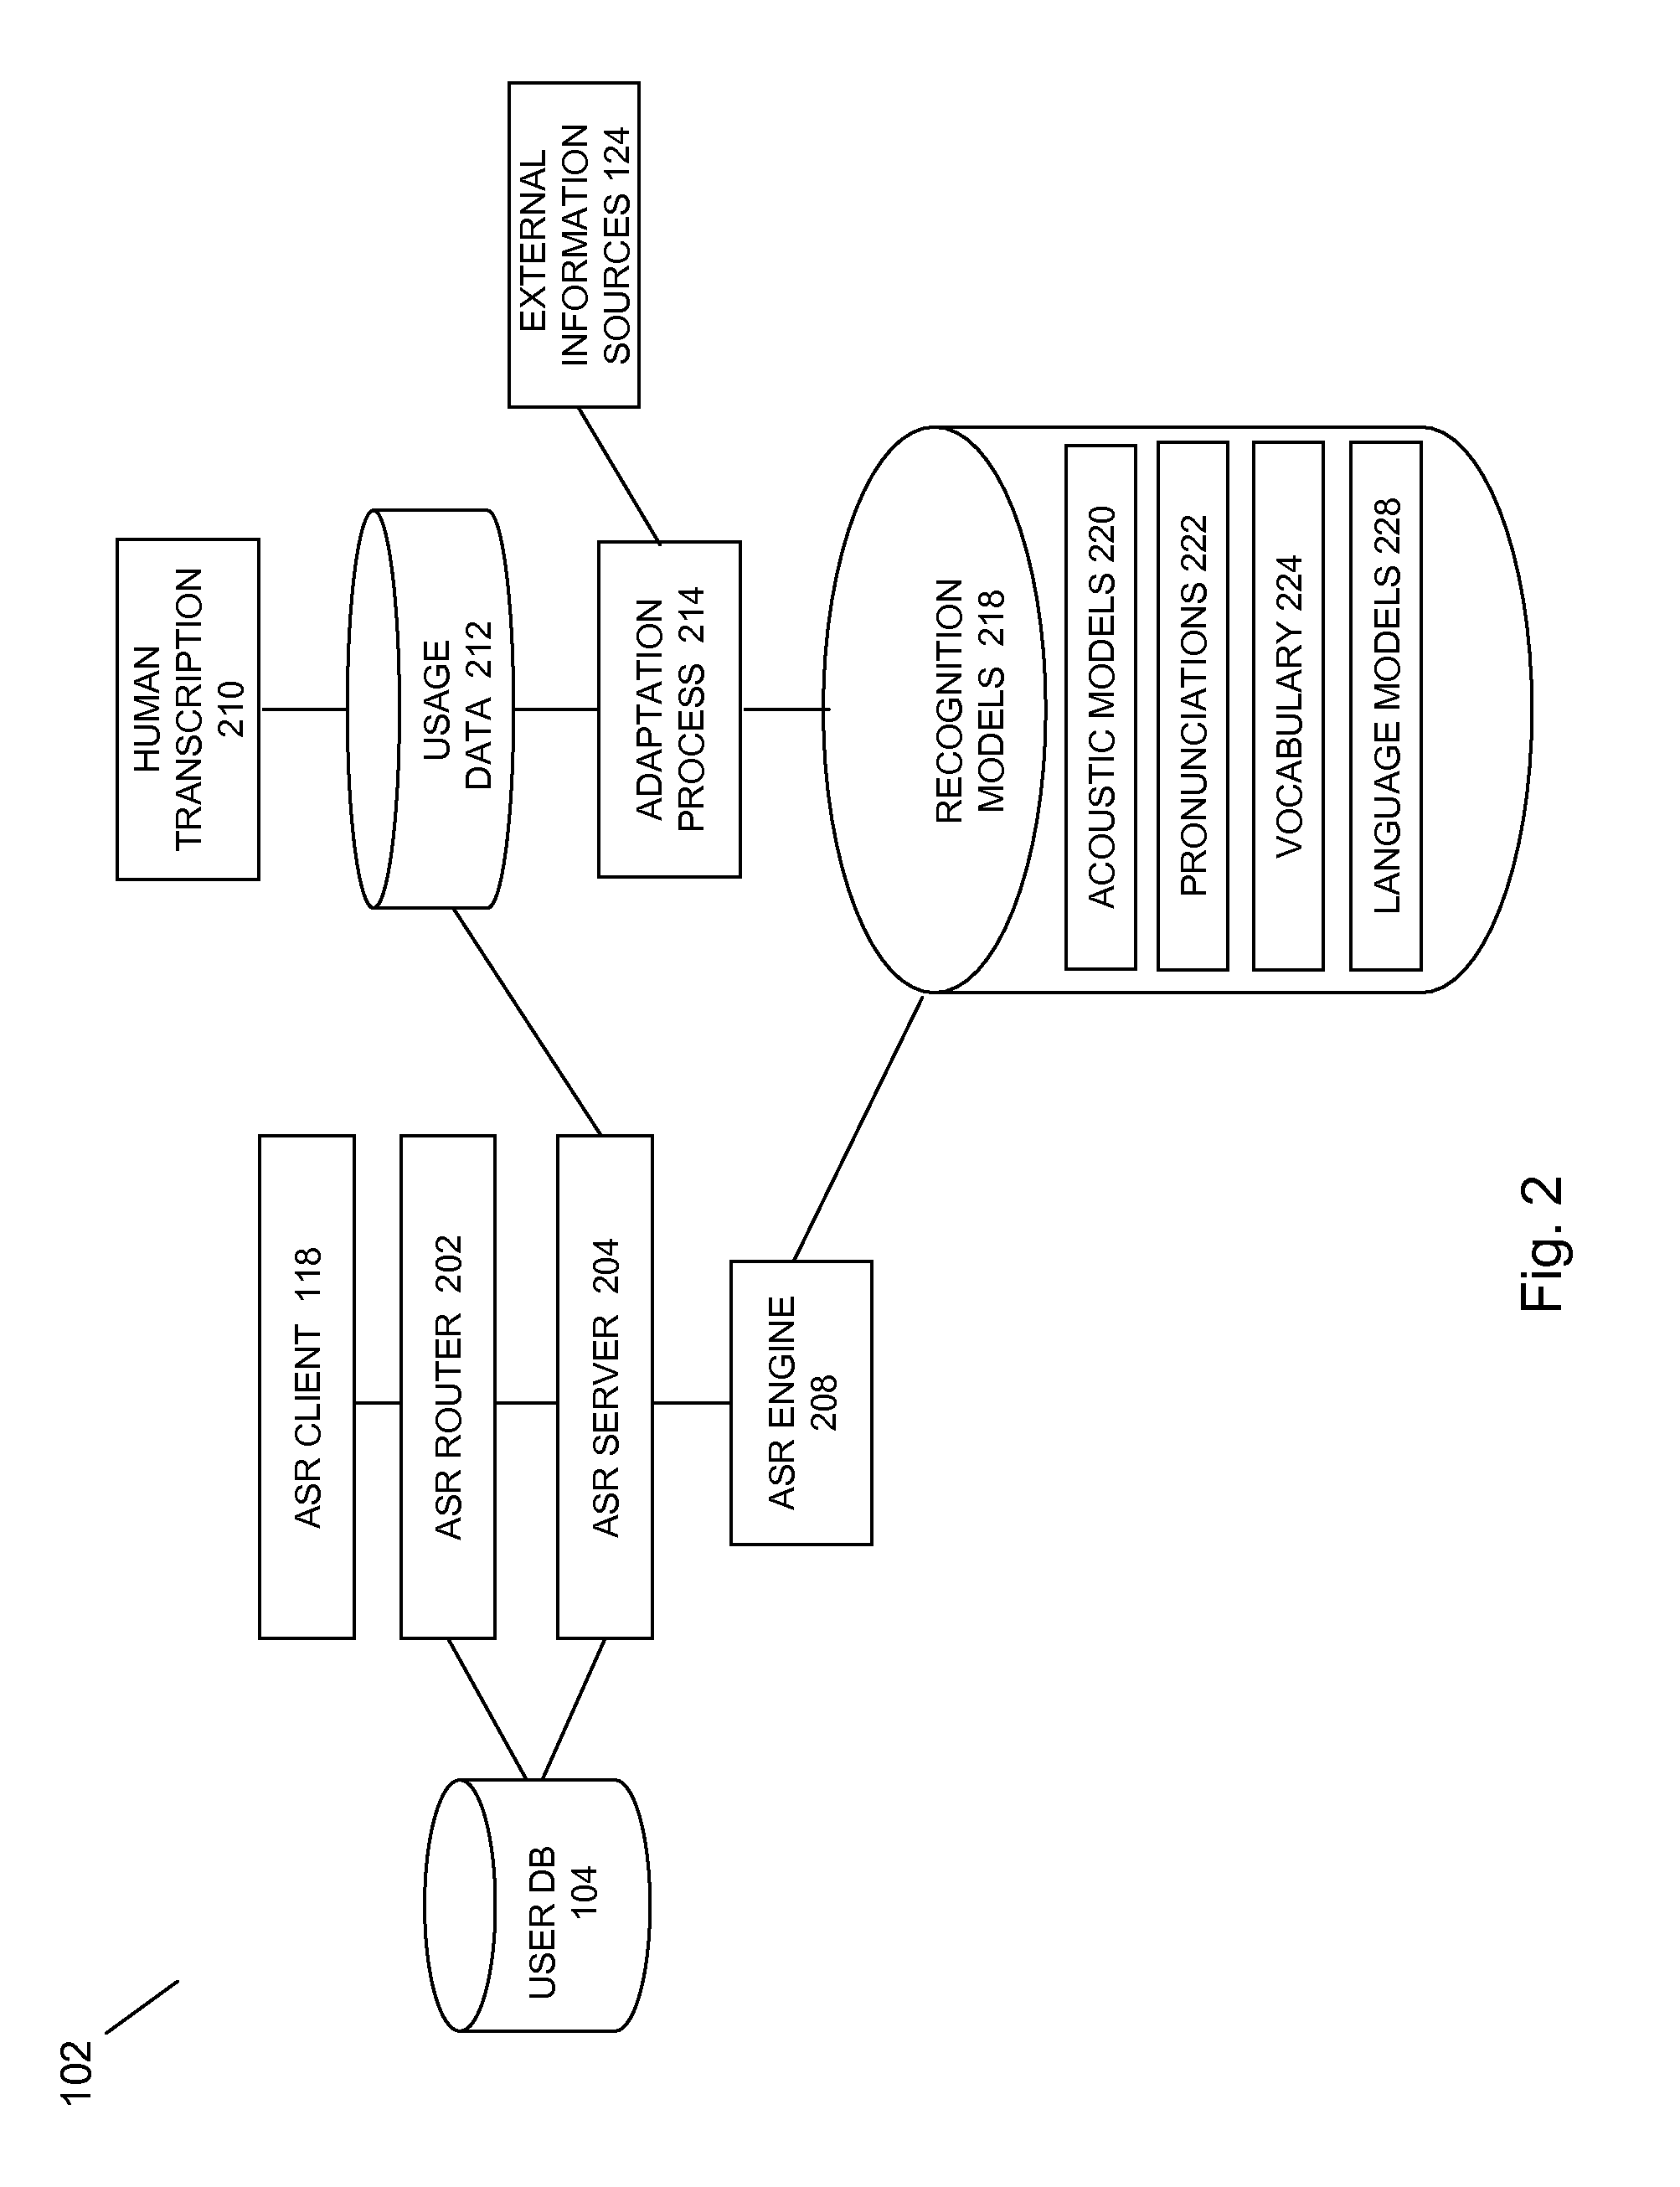 Application text entry in a mobile environment using a speech processing facility